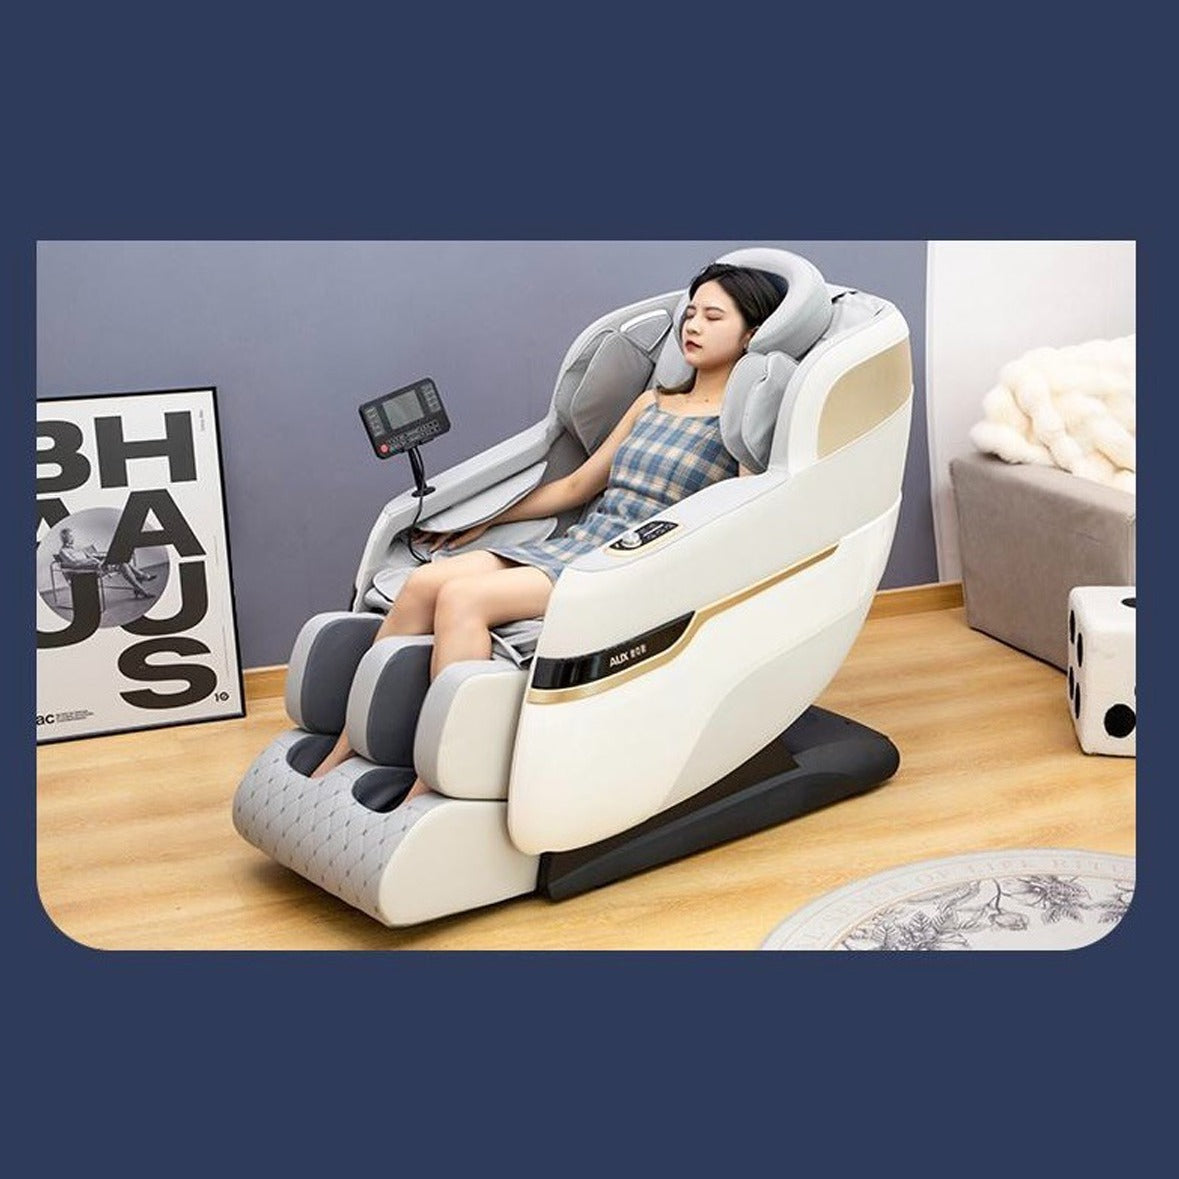 A person sitting and massaging in Full Body Electric Massage Sofa